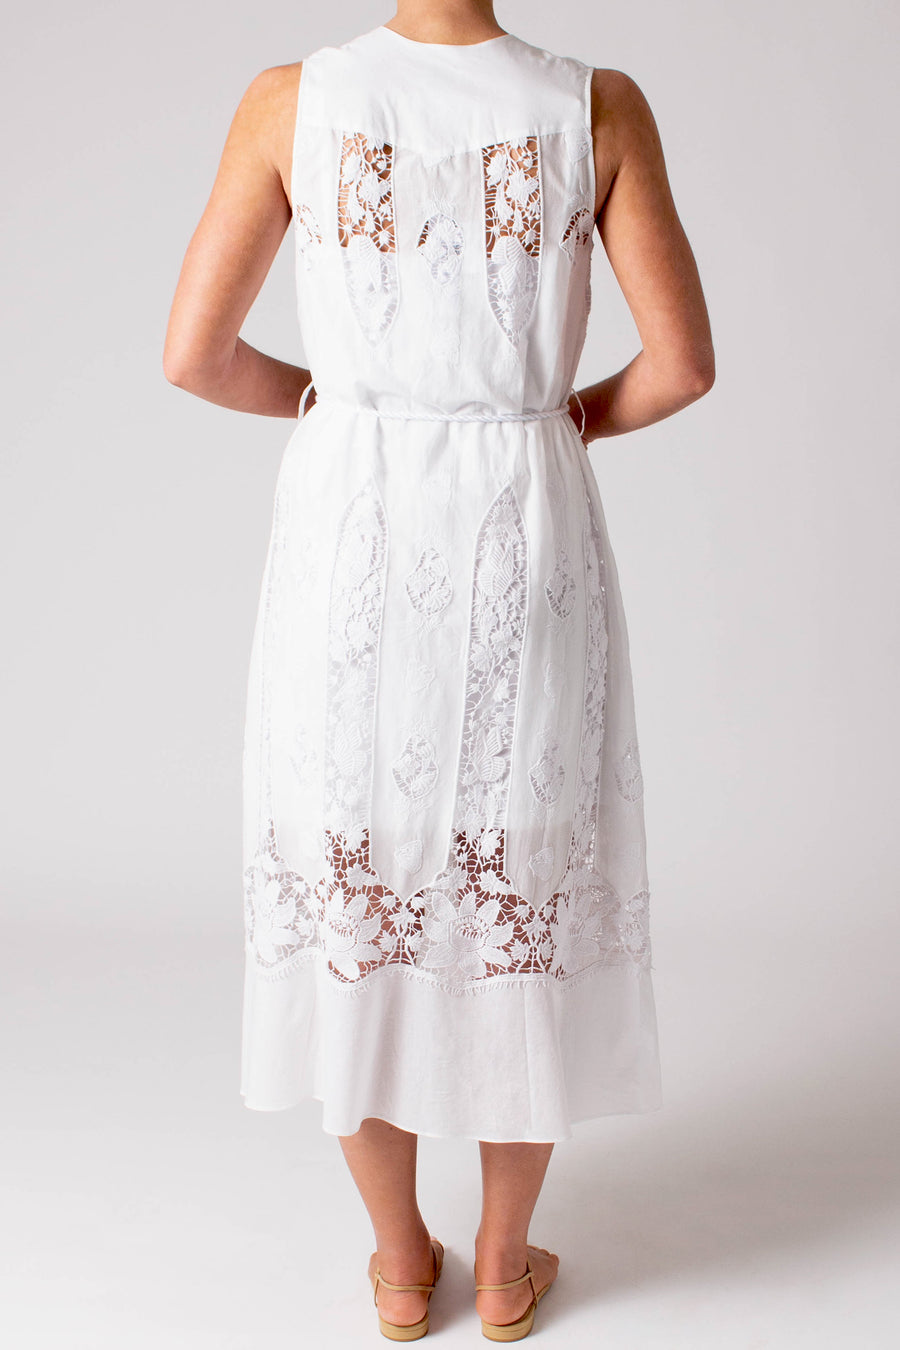 This photo shows the back of the dress. It has lace cut outs and small lace details.